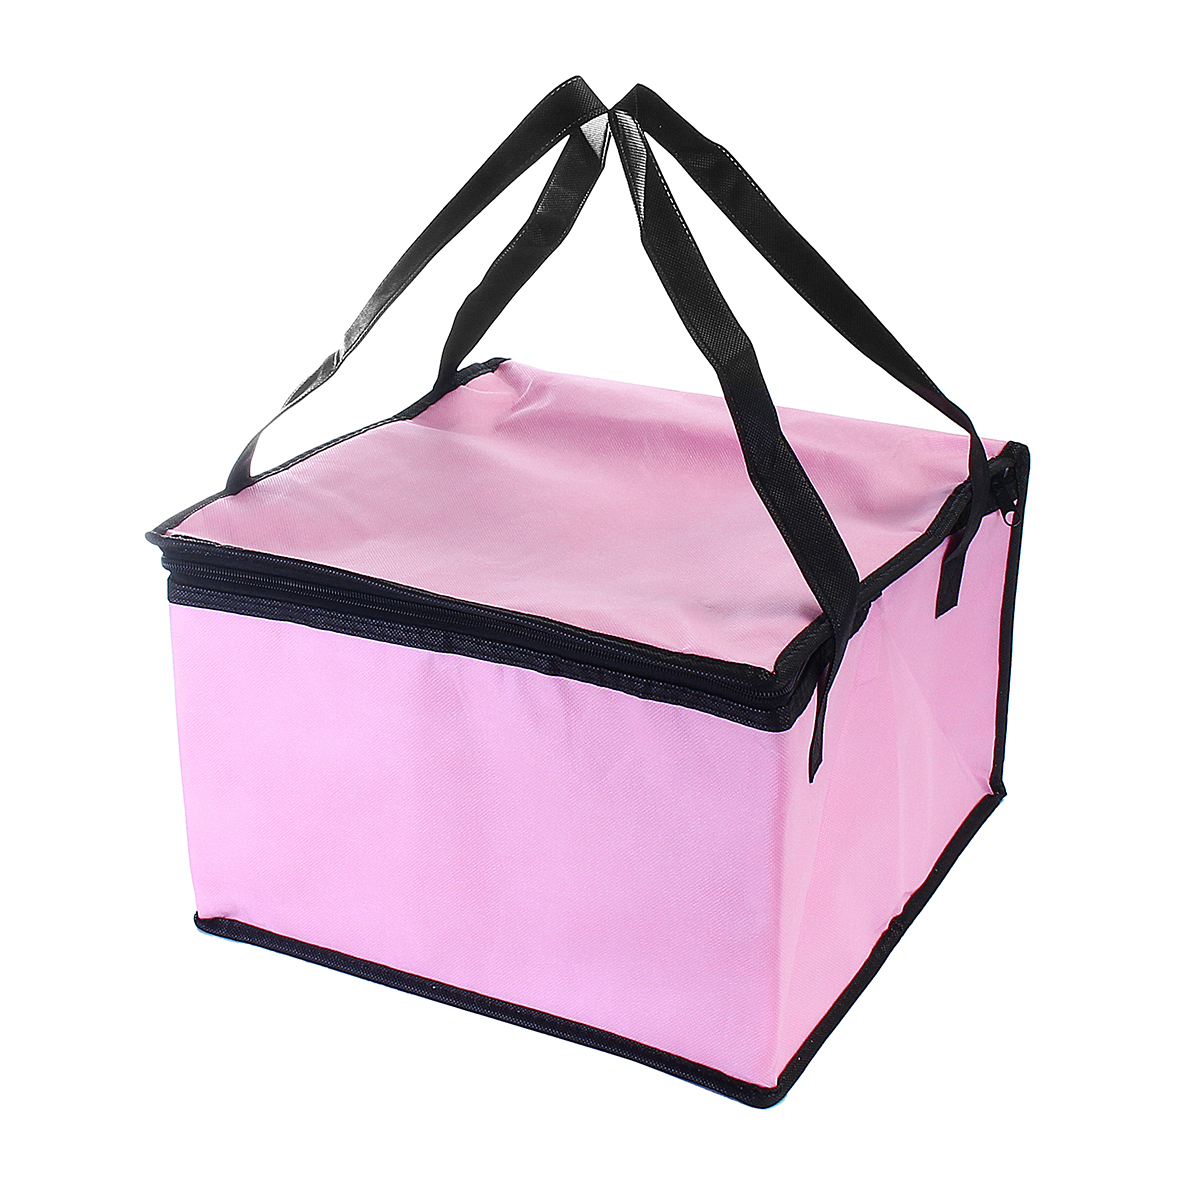 8-Inch-Non-woven-Fresh-keeping-Tote-Bag-with-Zipper-Cake-Picnic-Lunch-Bag-Reusable-Grocery-Bag-1353005-5